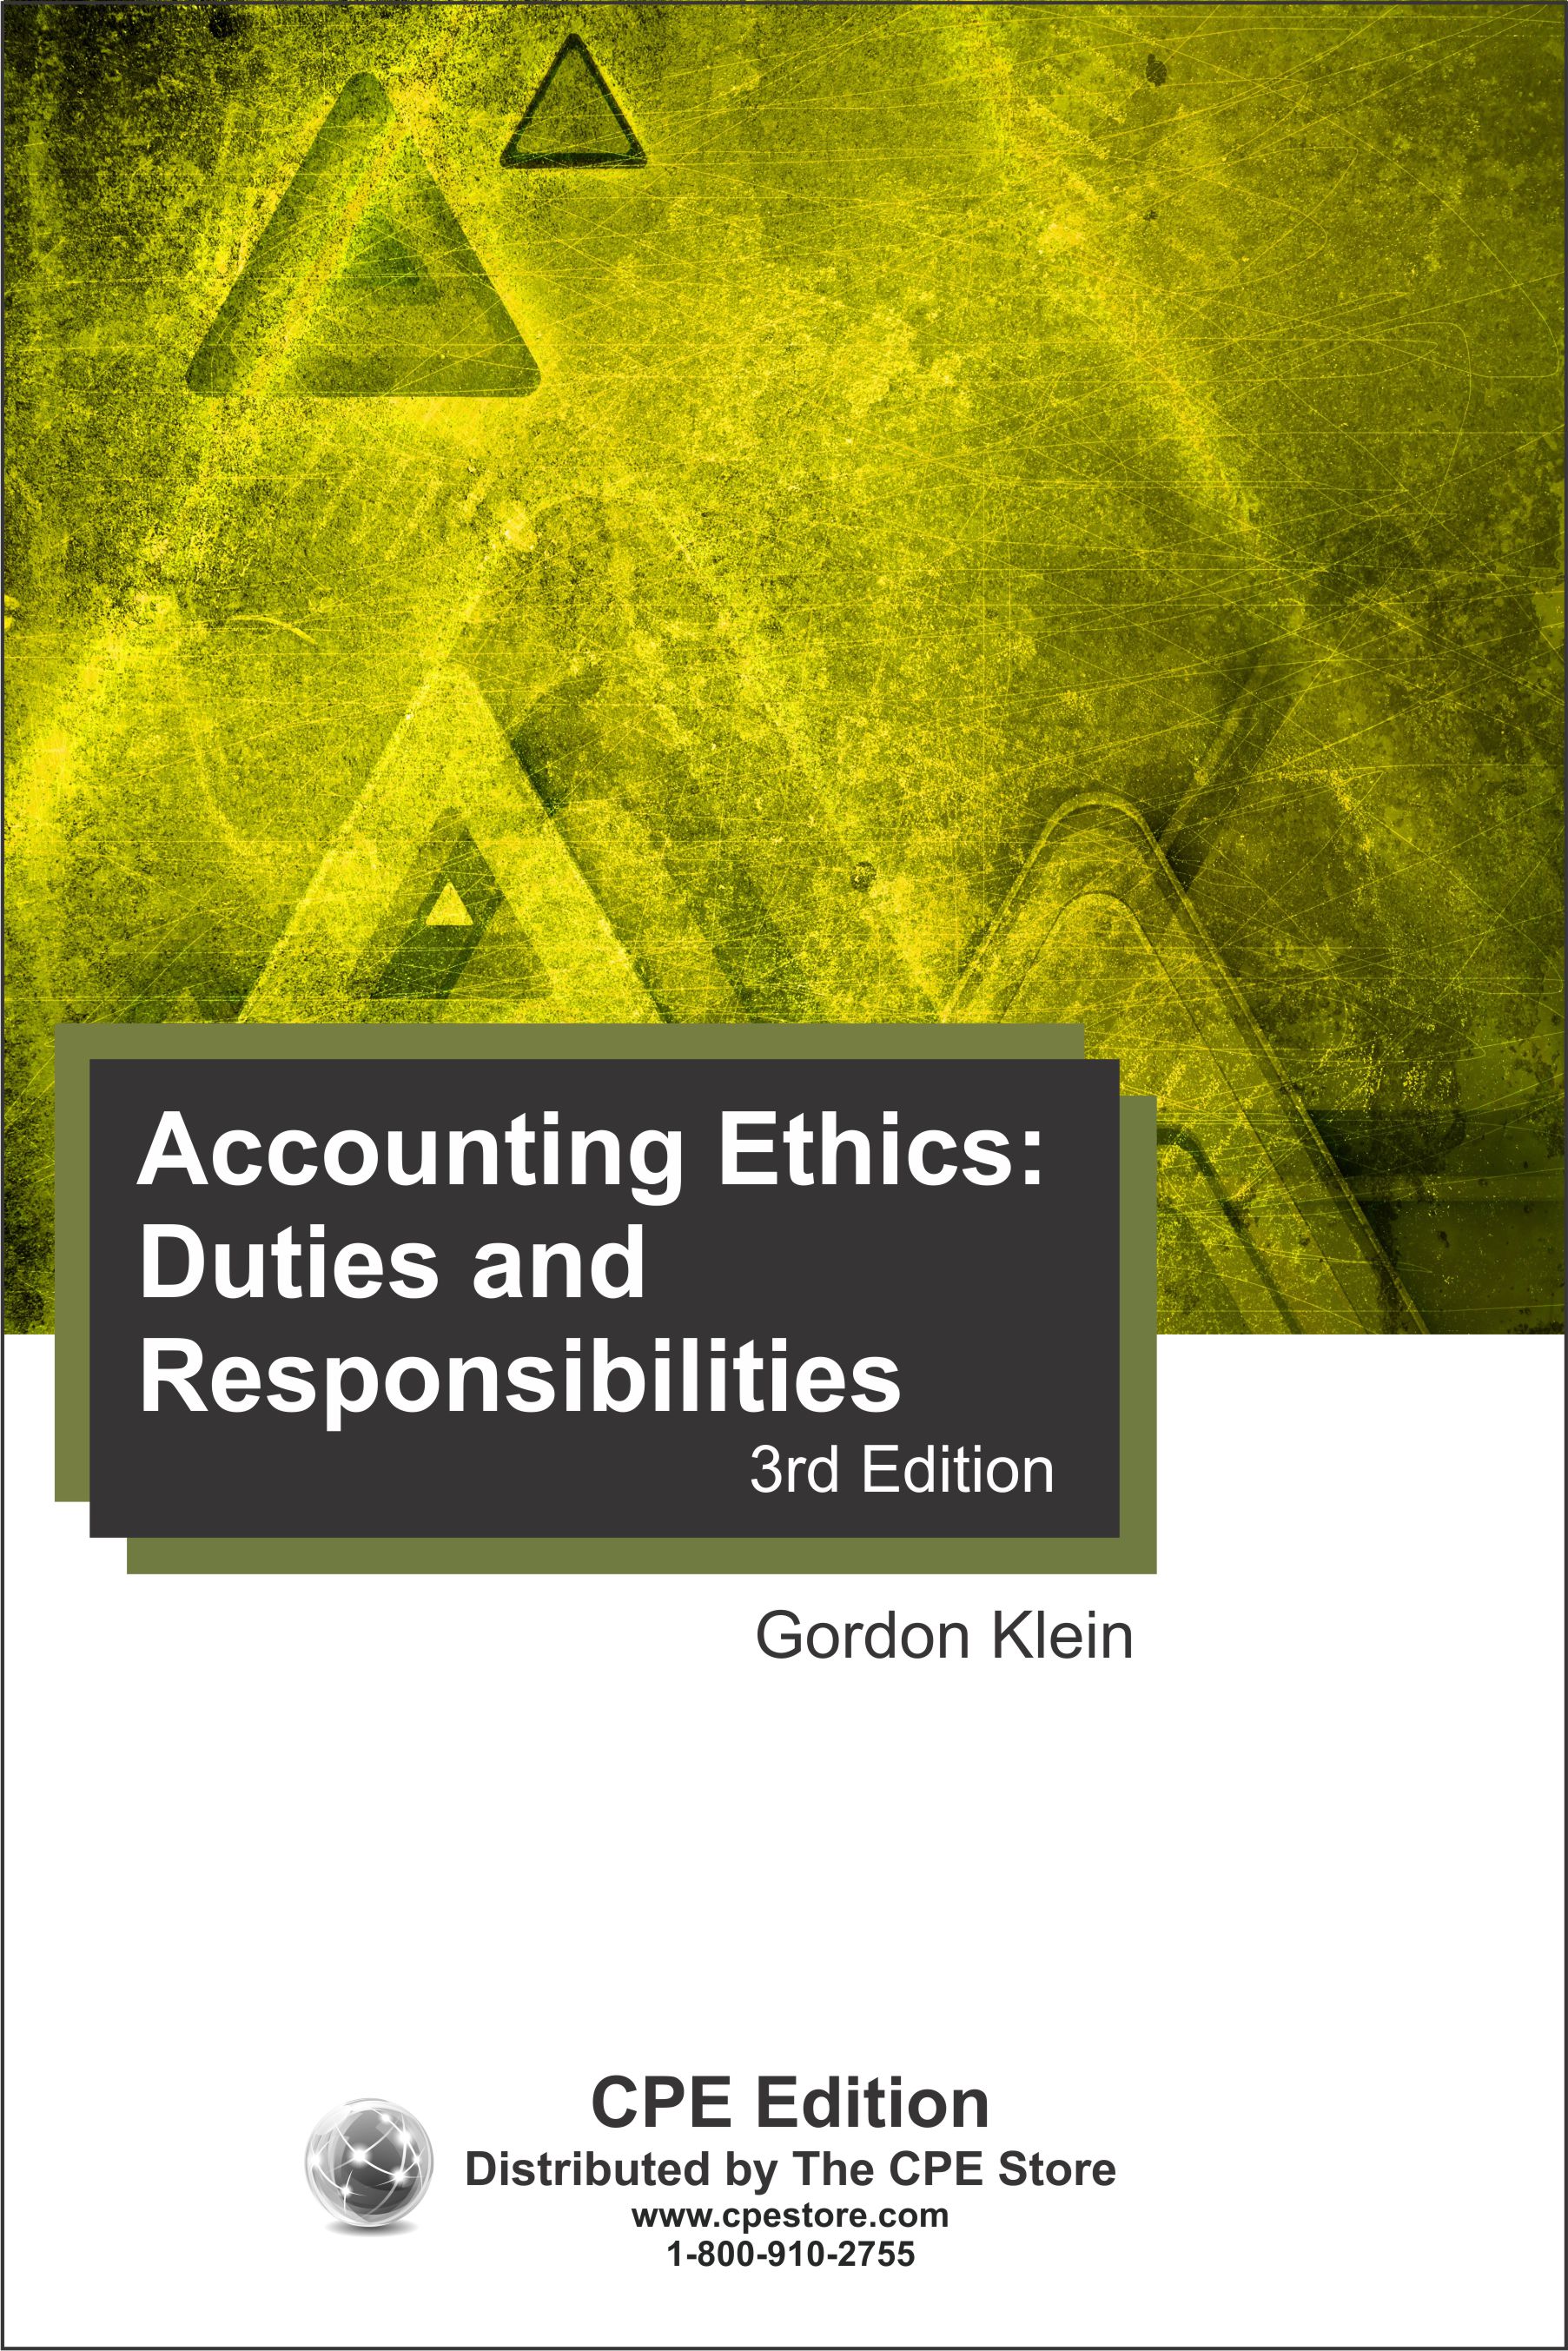 Accounting Ethics: Duties and Responsibilities